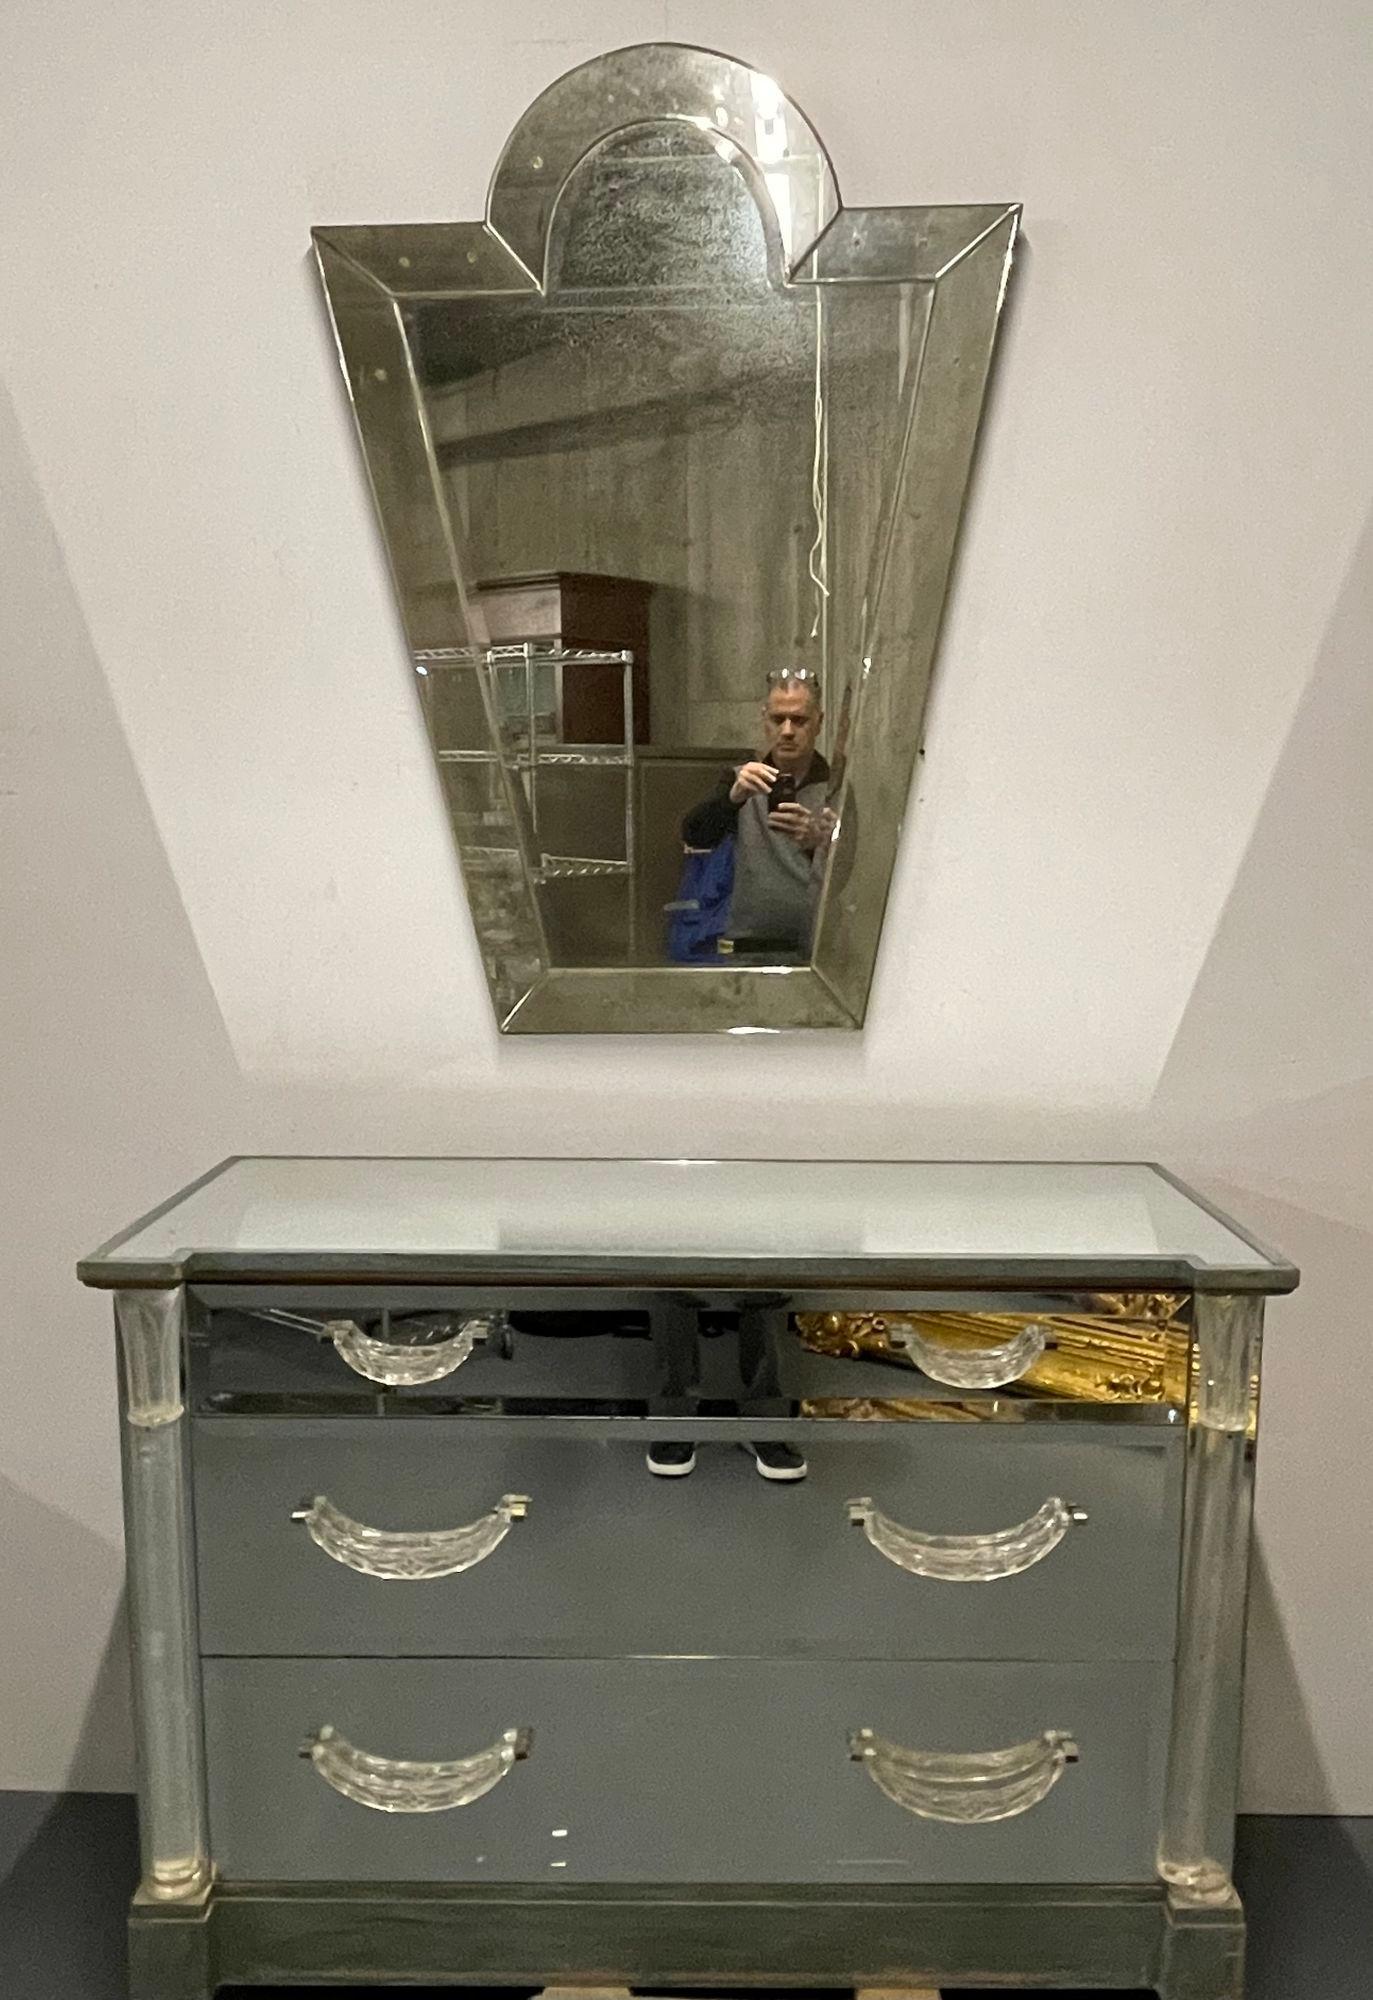 American Grosfeld House, Mid-Century Modern, Glassics Series, Mirrored Cabinet, 1930s For Sale